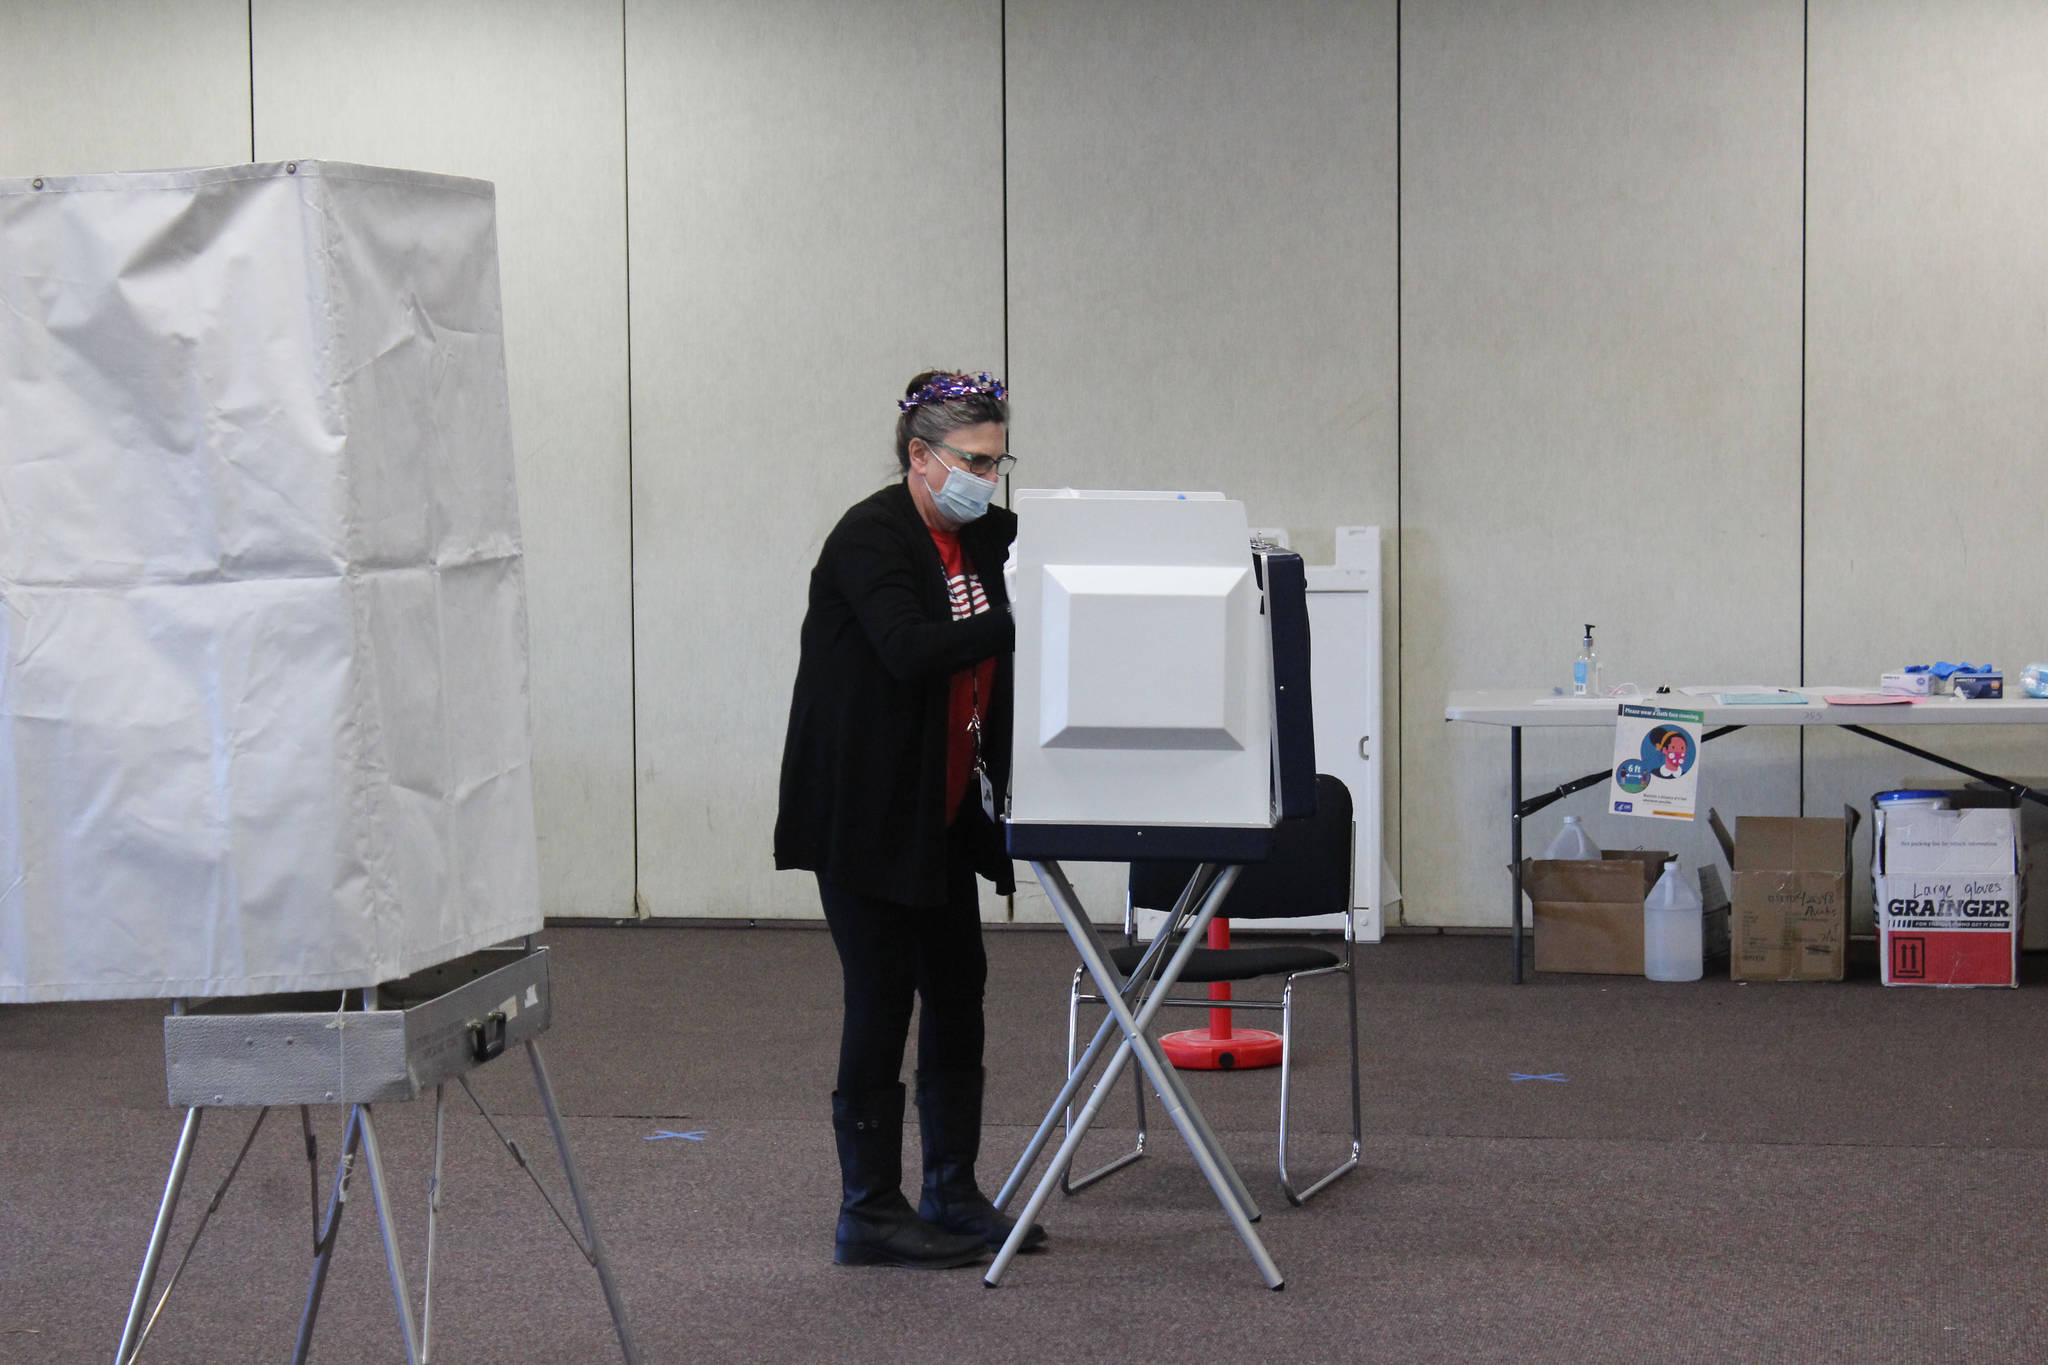 A poll worker is seen disinfecting a voting booth at the Soldotna Regional Sports Complex on Tuesday, Nov. 3 in Soldotna, Alaska. (Photo by Ashlyn O’Hara/Peninsula Clarion)